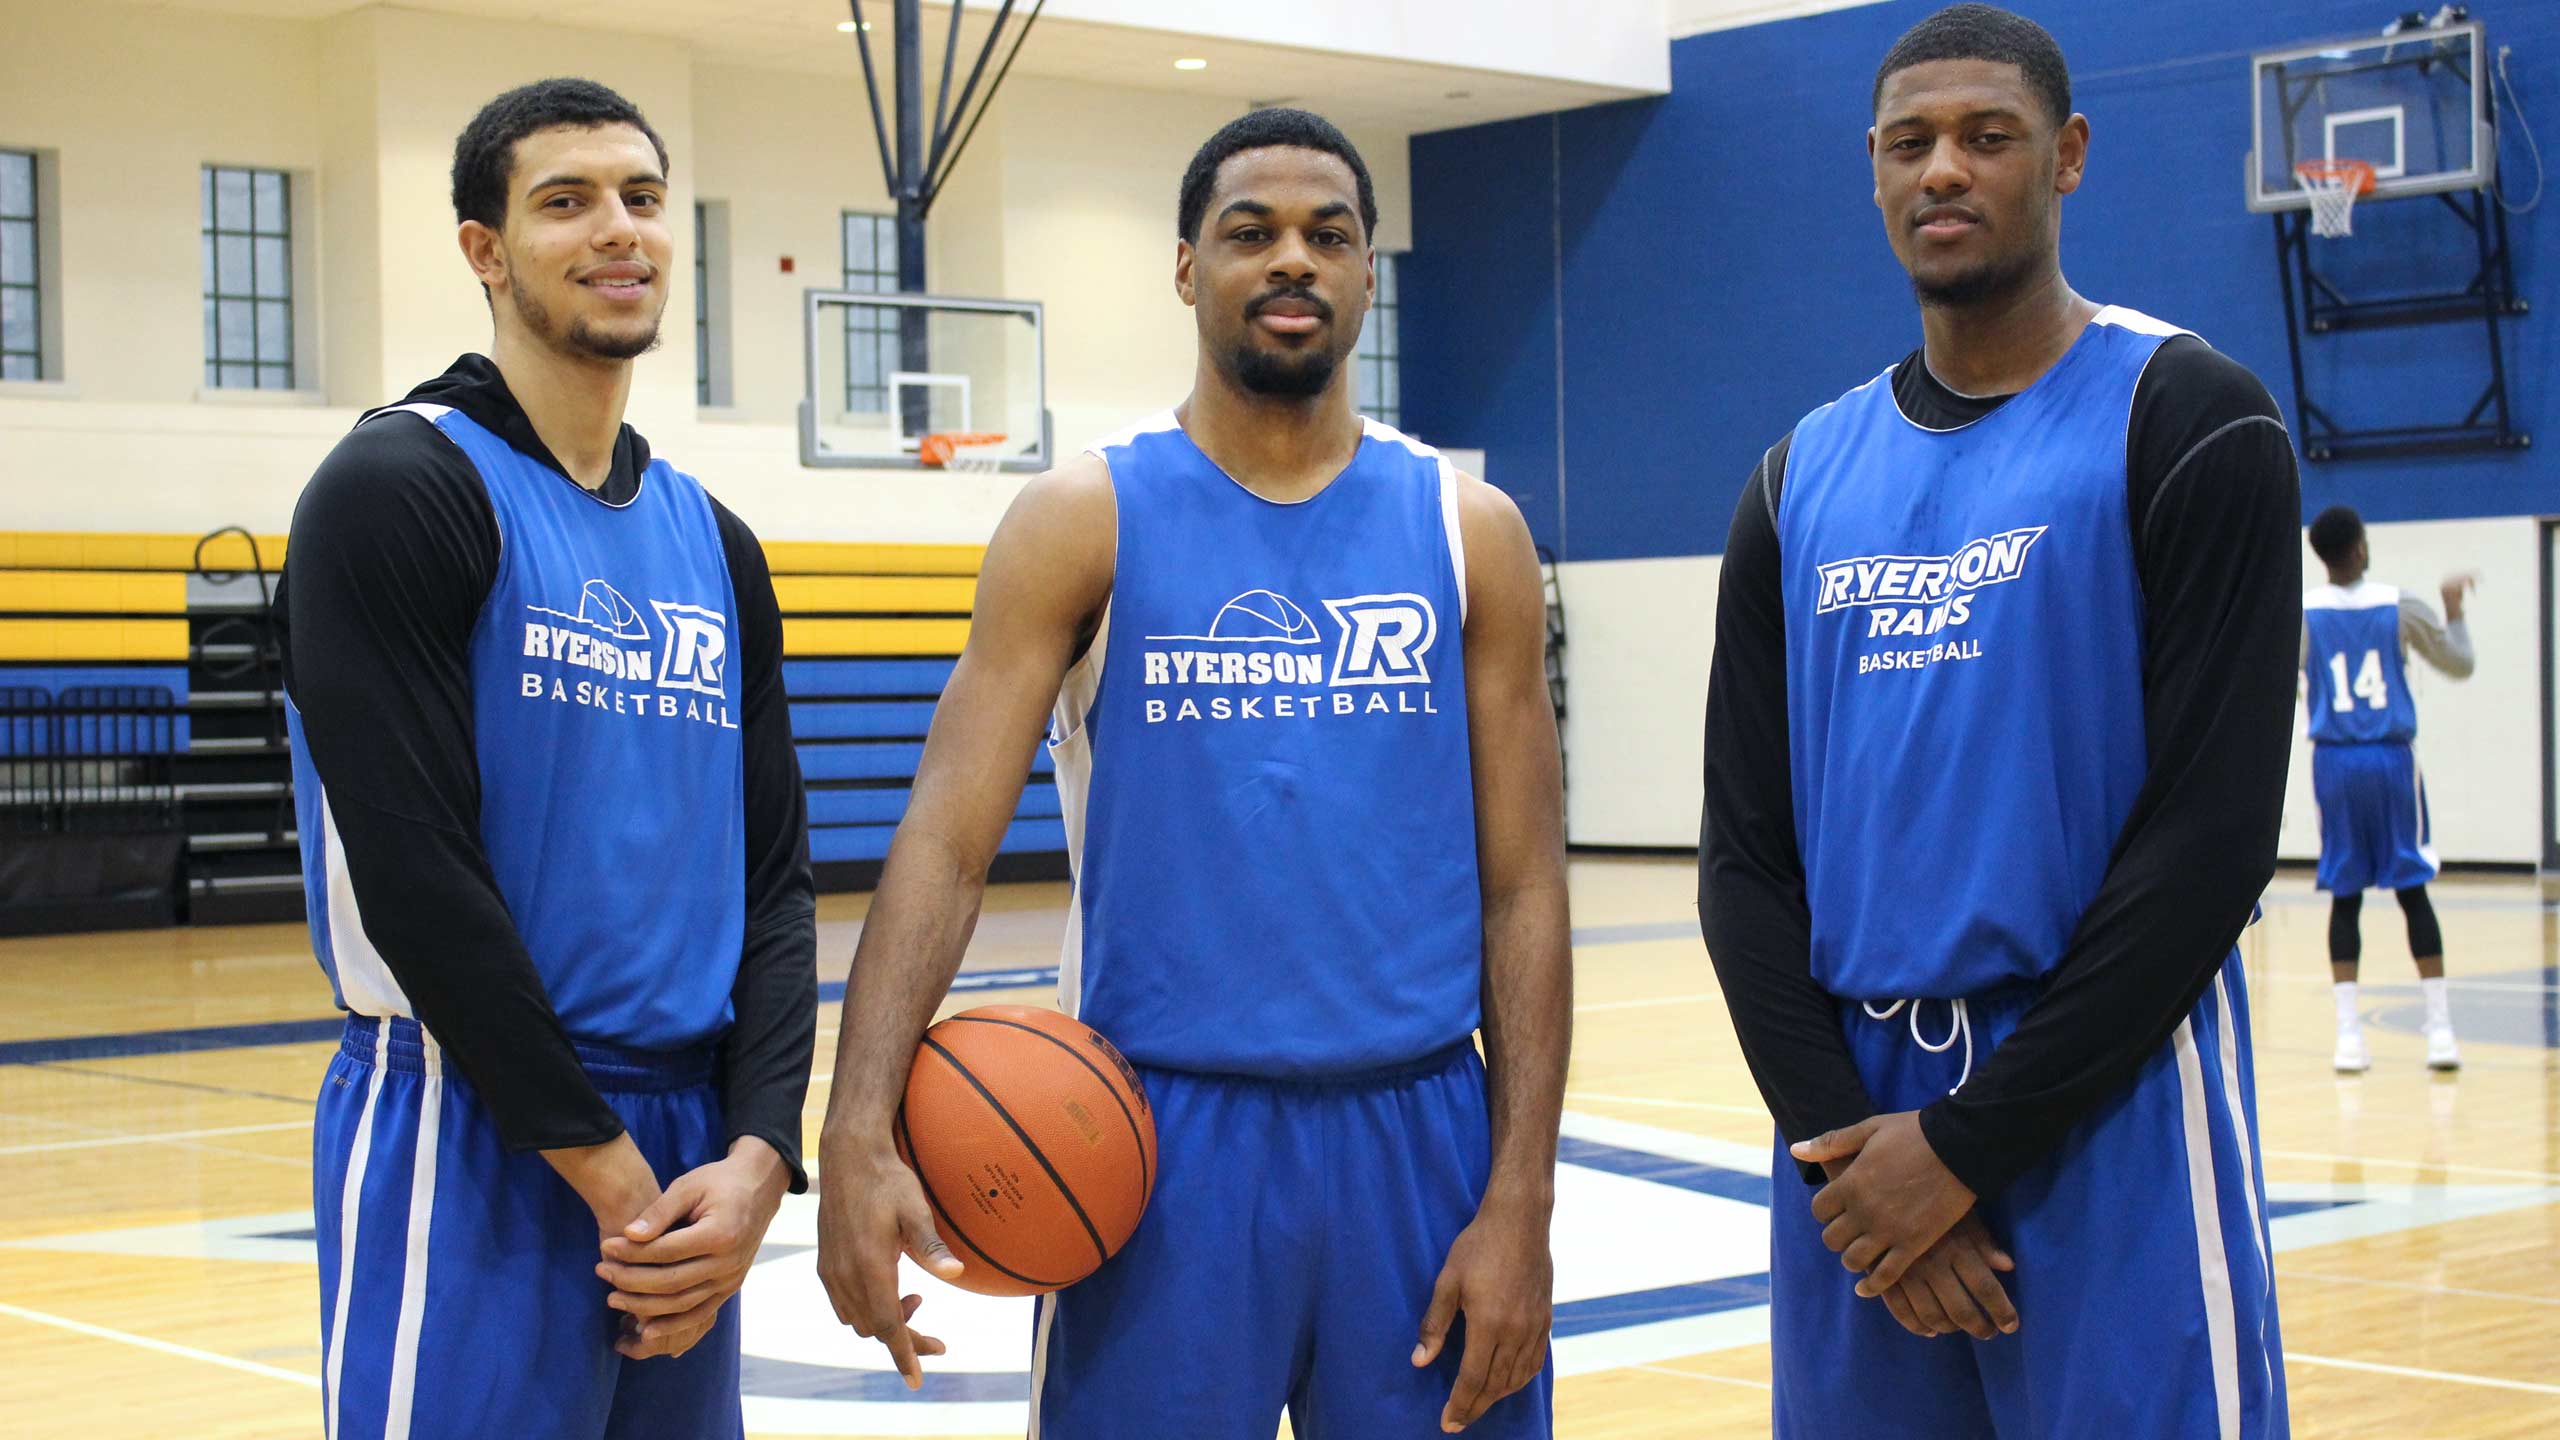 Three Ryerson Basketball team captains stand on the court